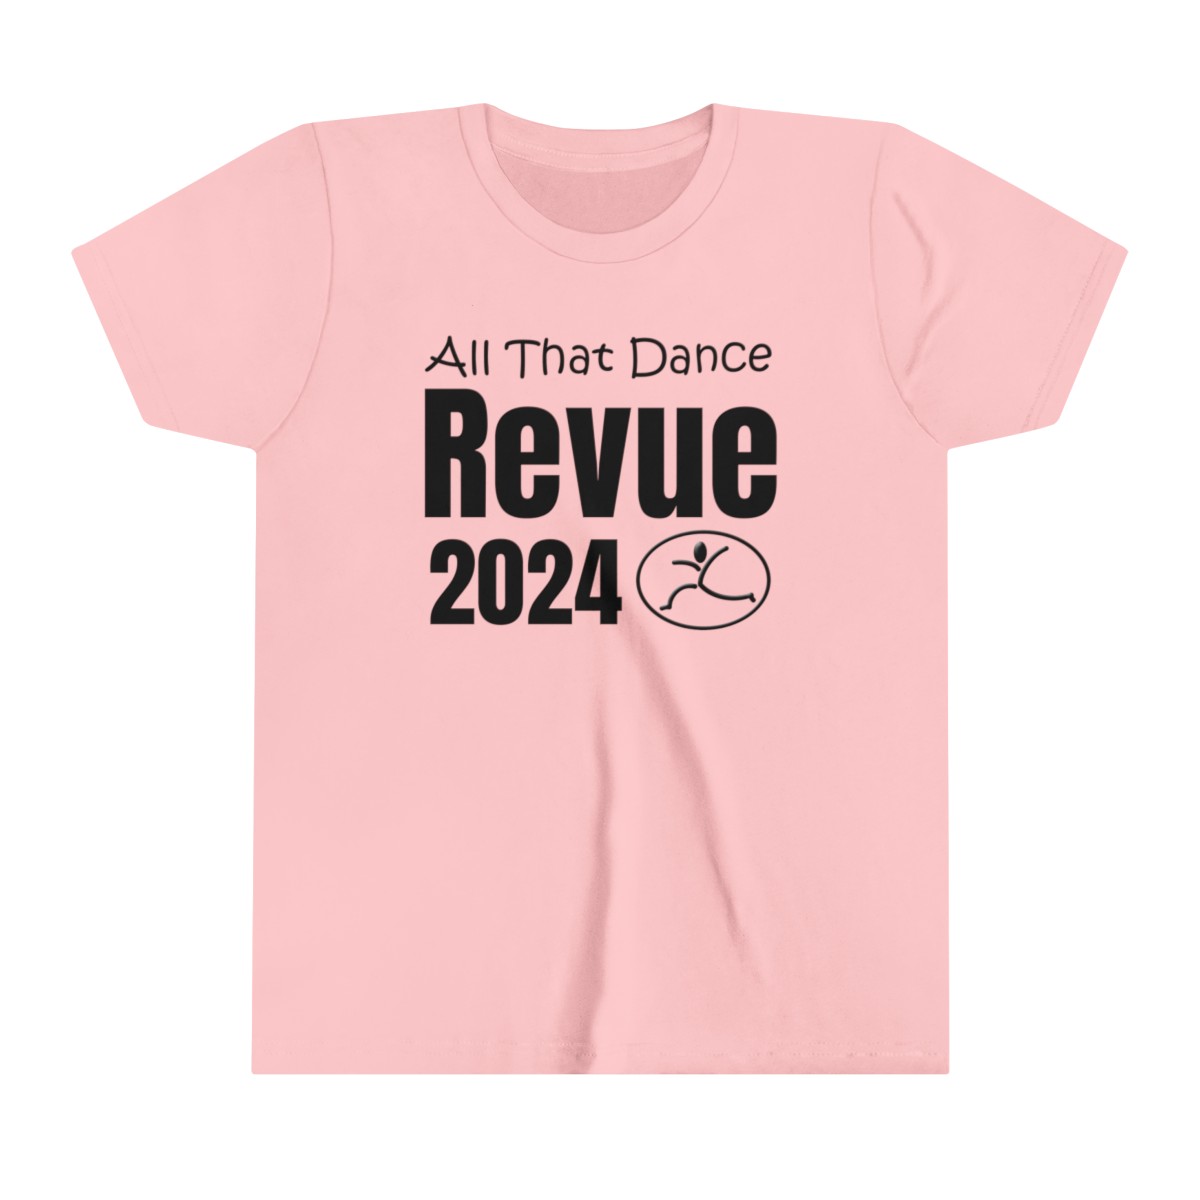 Youth Sizes - All That Dance Revue 2024 Tshirt product thumbnail image